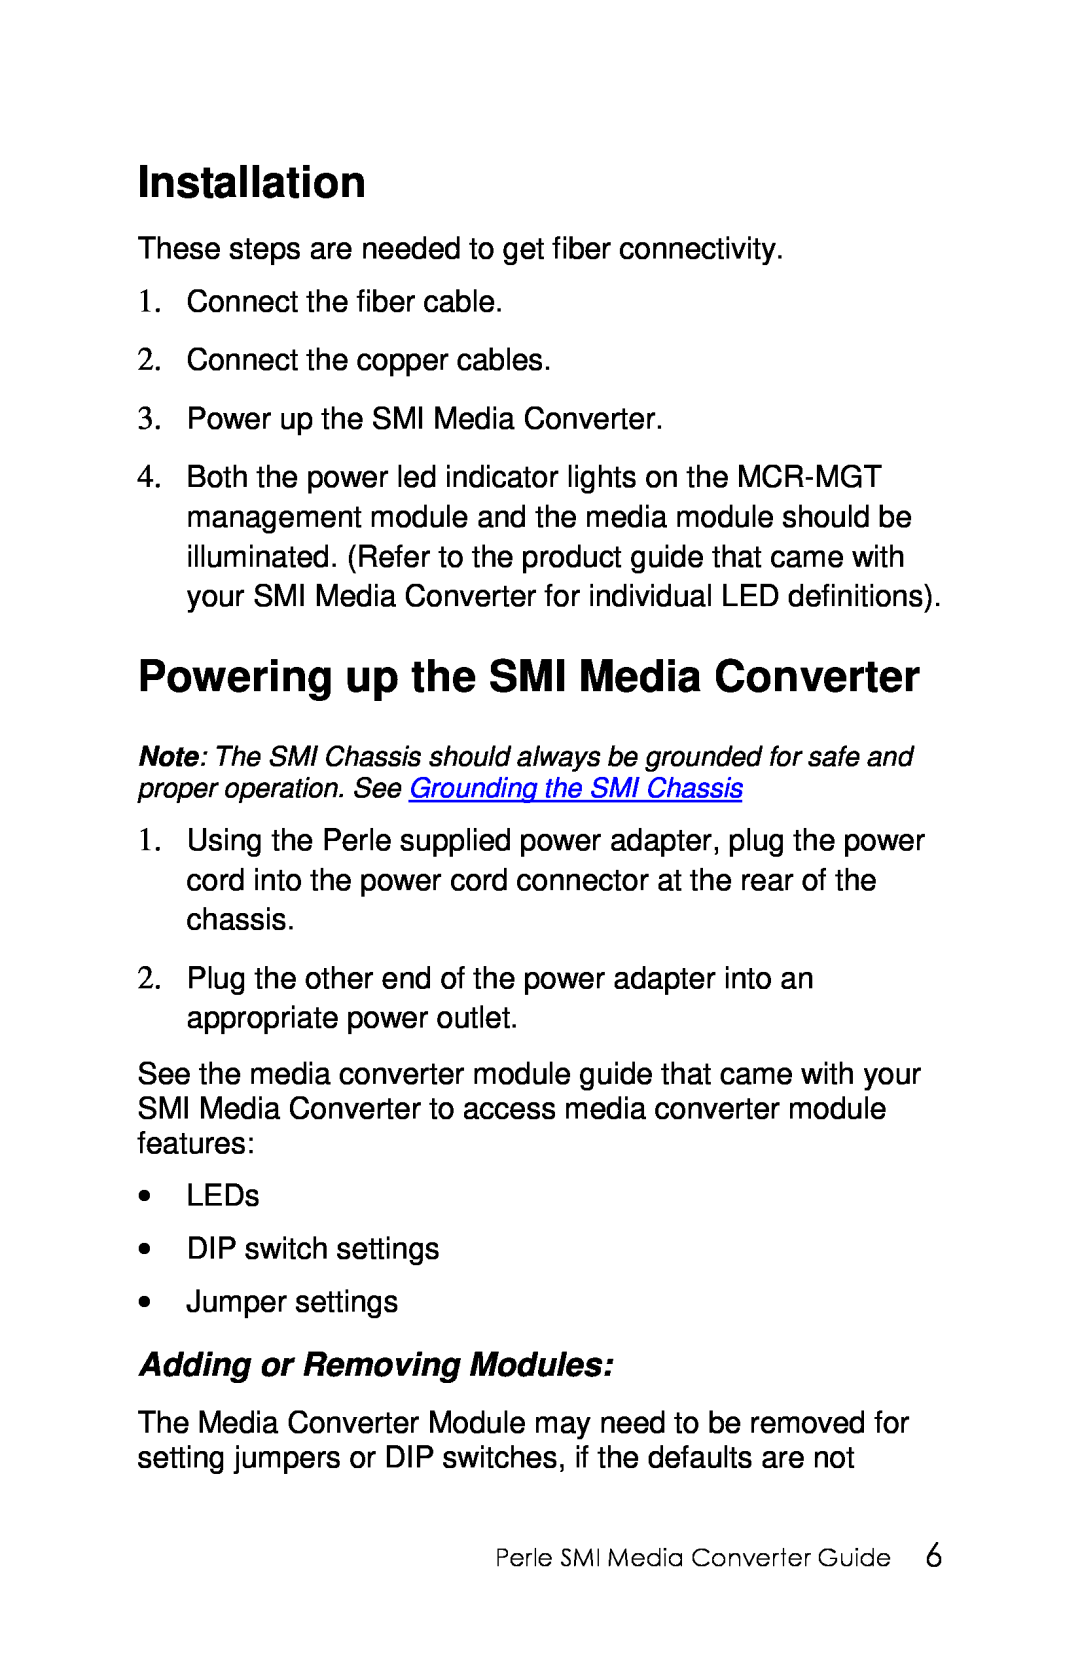 Perle Systems 5500316-13 manual Installation, Powering up the SMI Media Converter, Adding or Removing Modules 